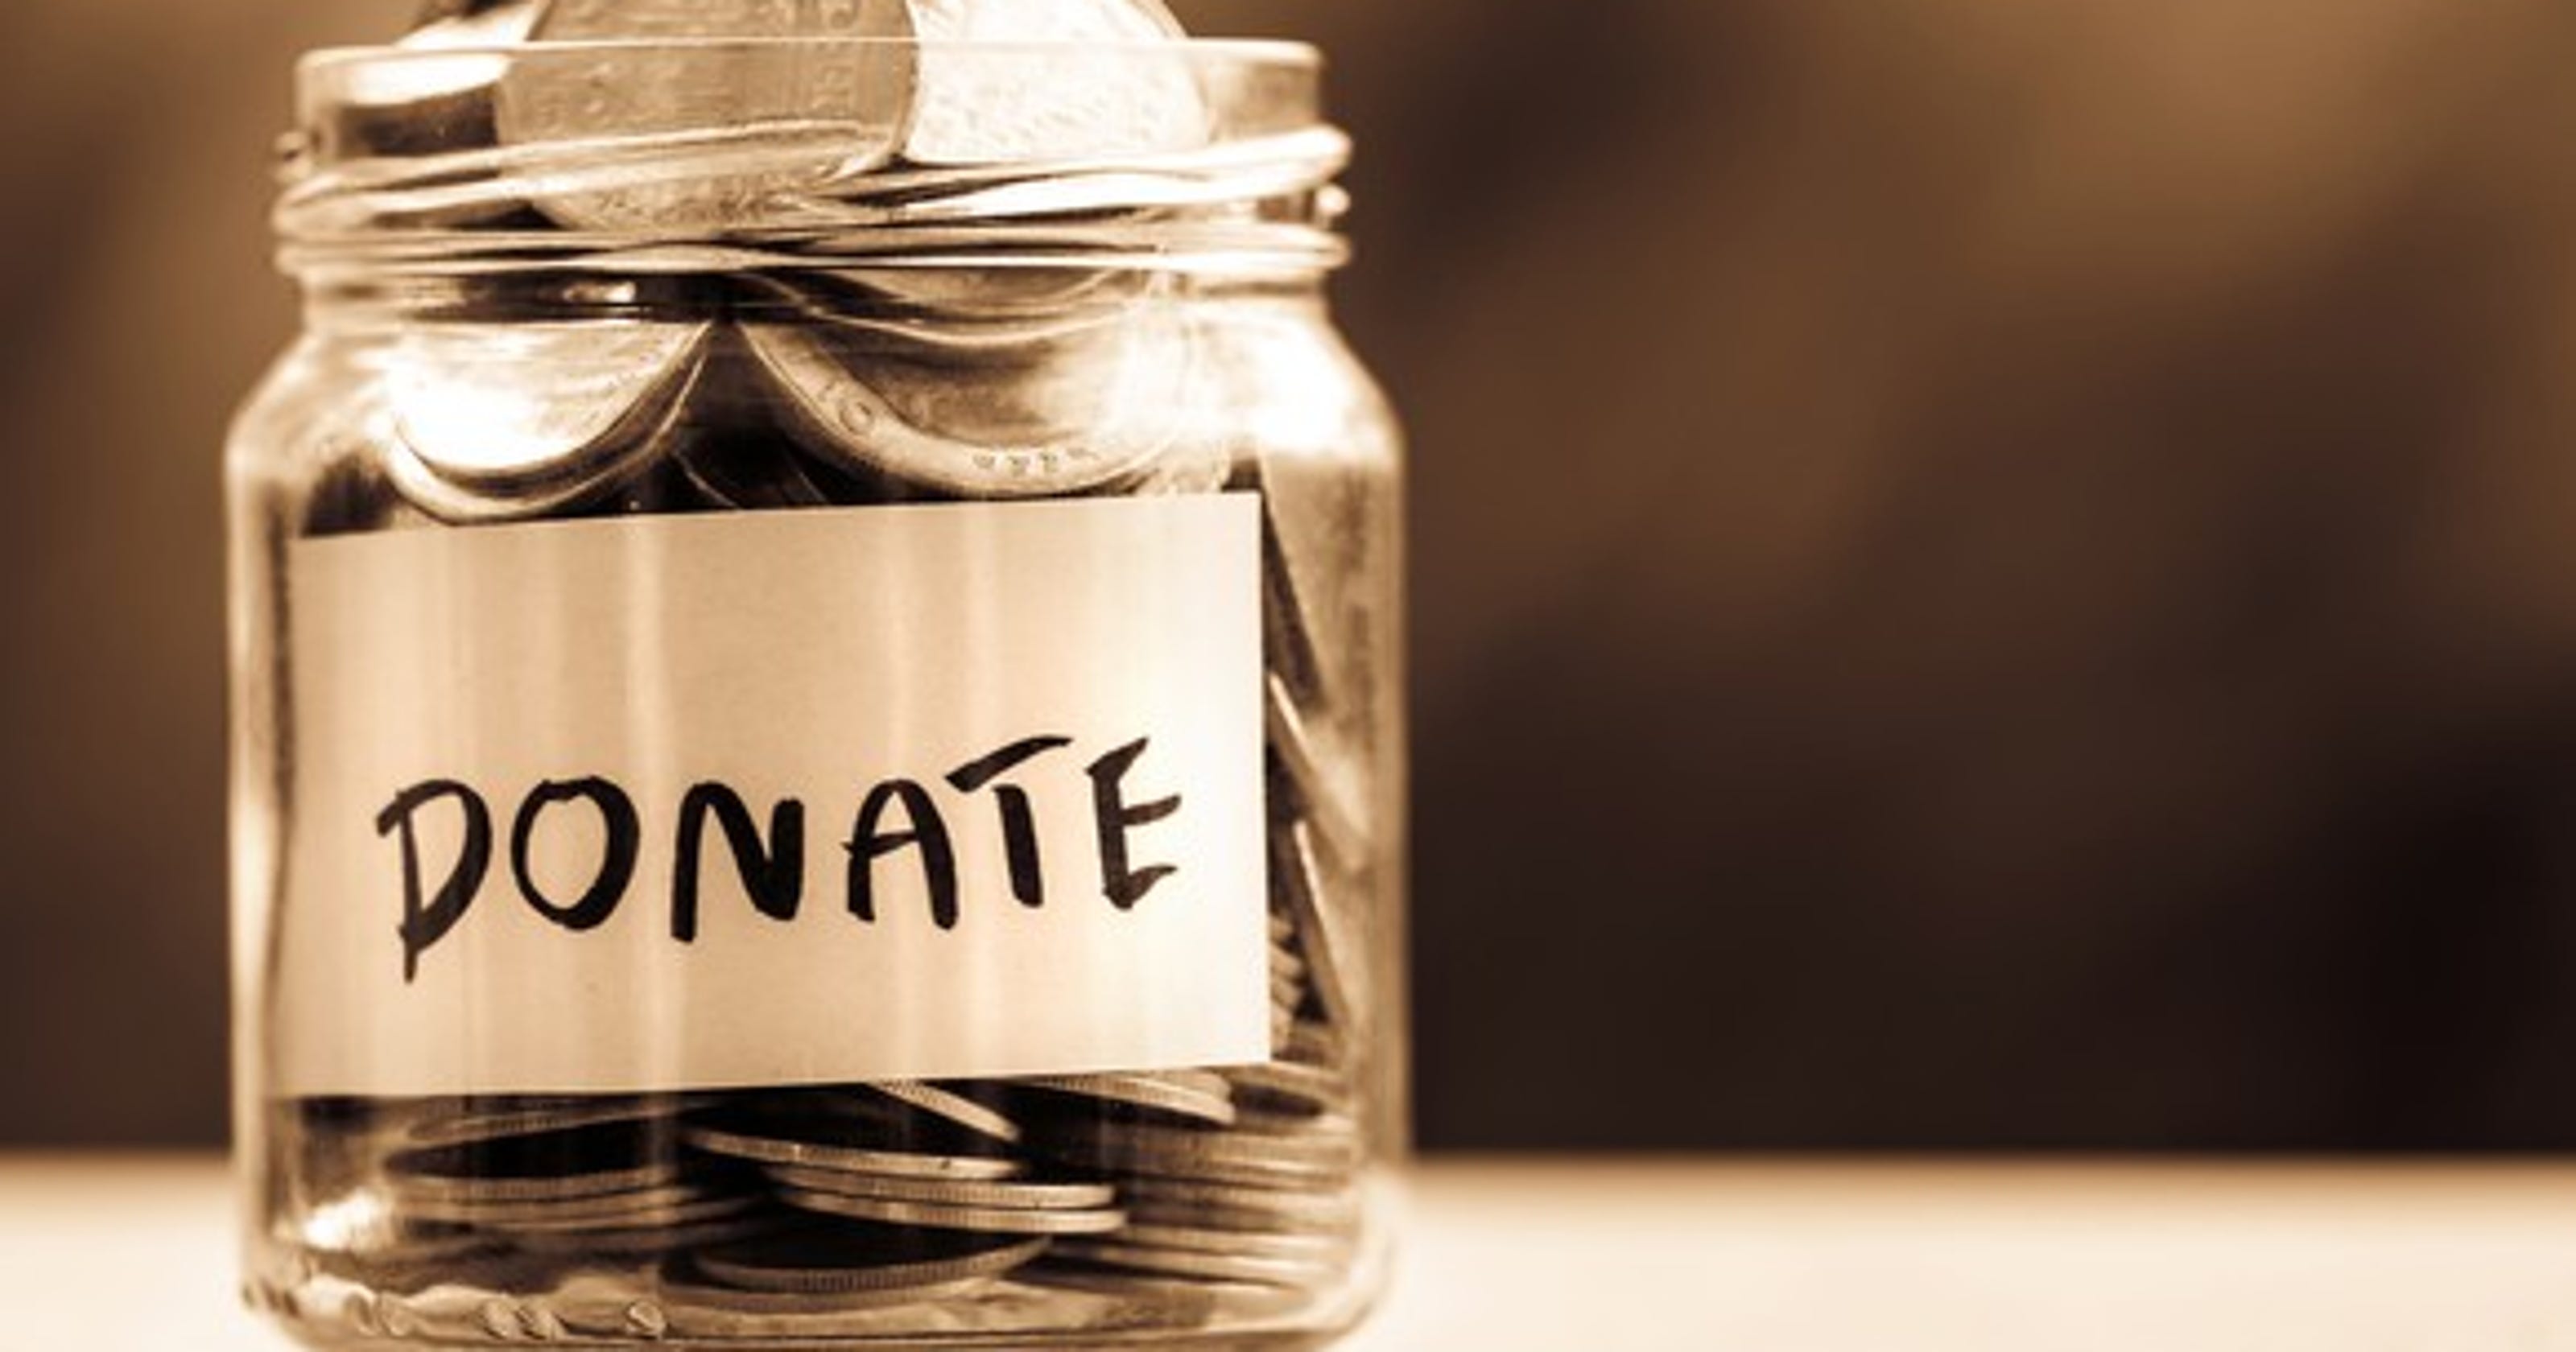 bunching-up-charitable-donations-could-help-tax-savings